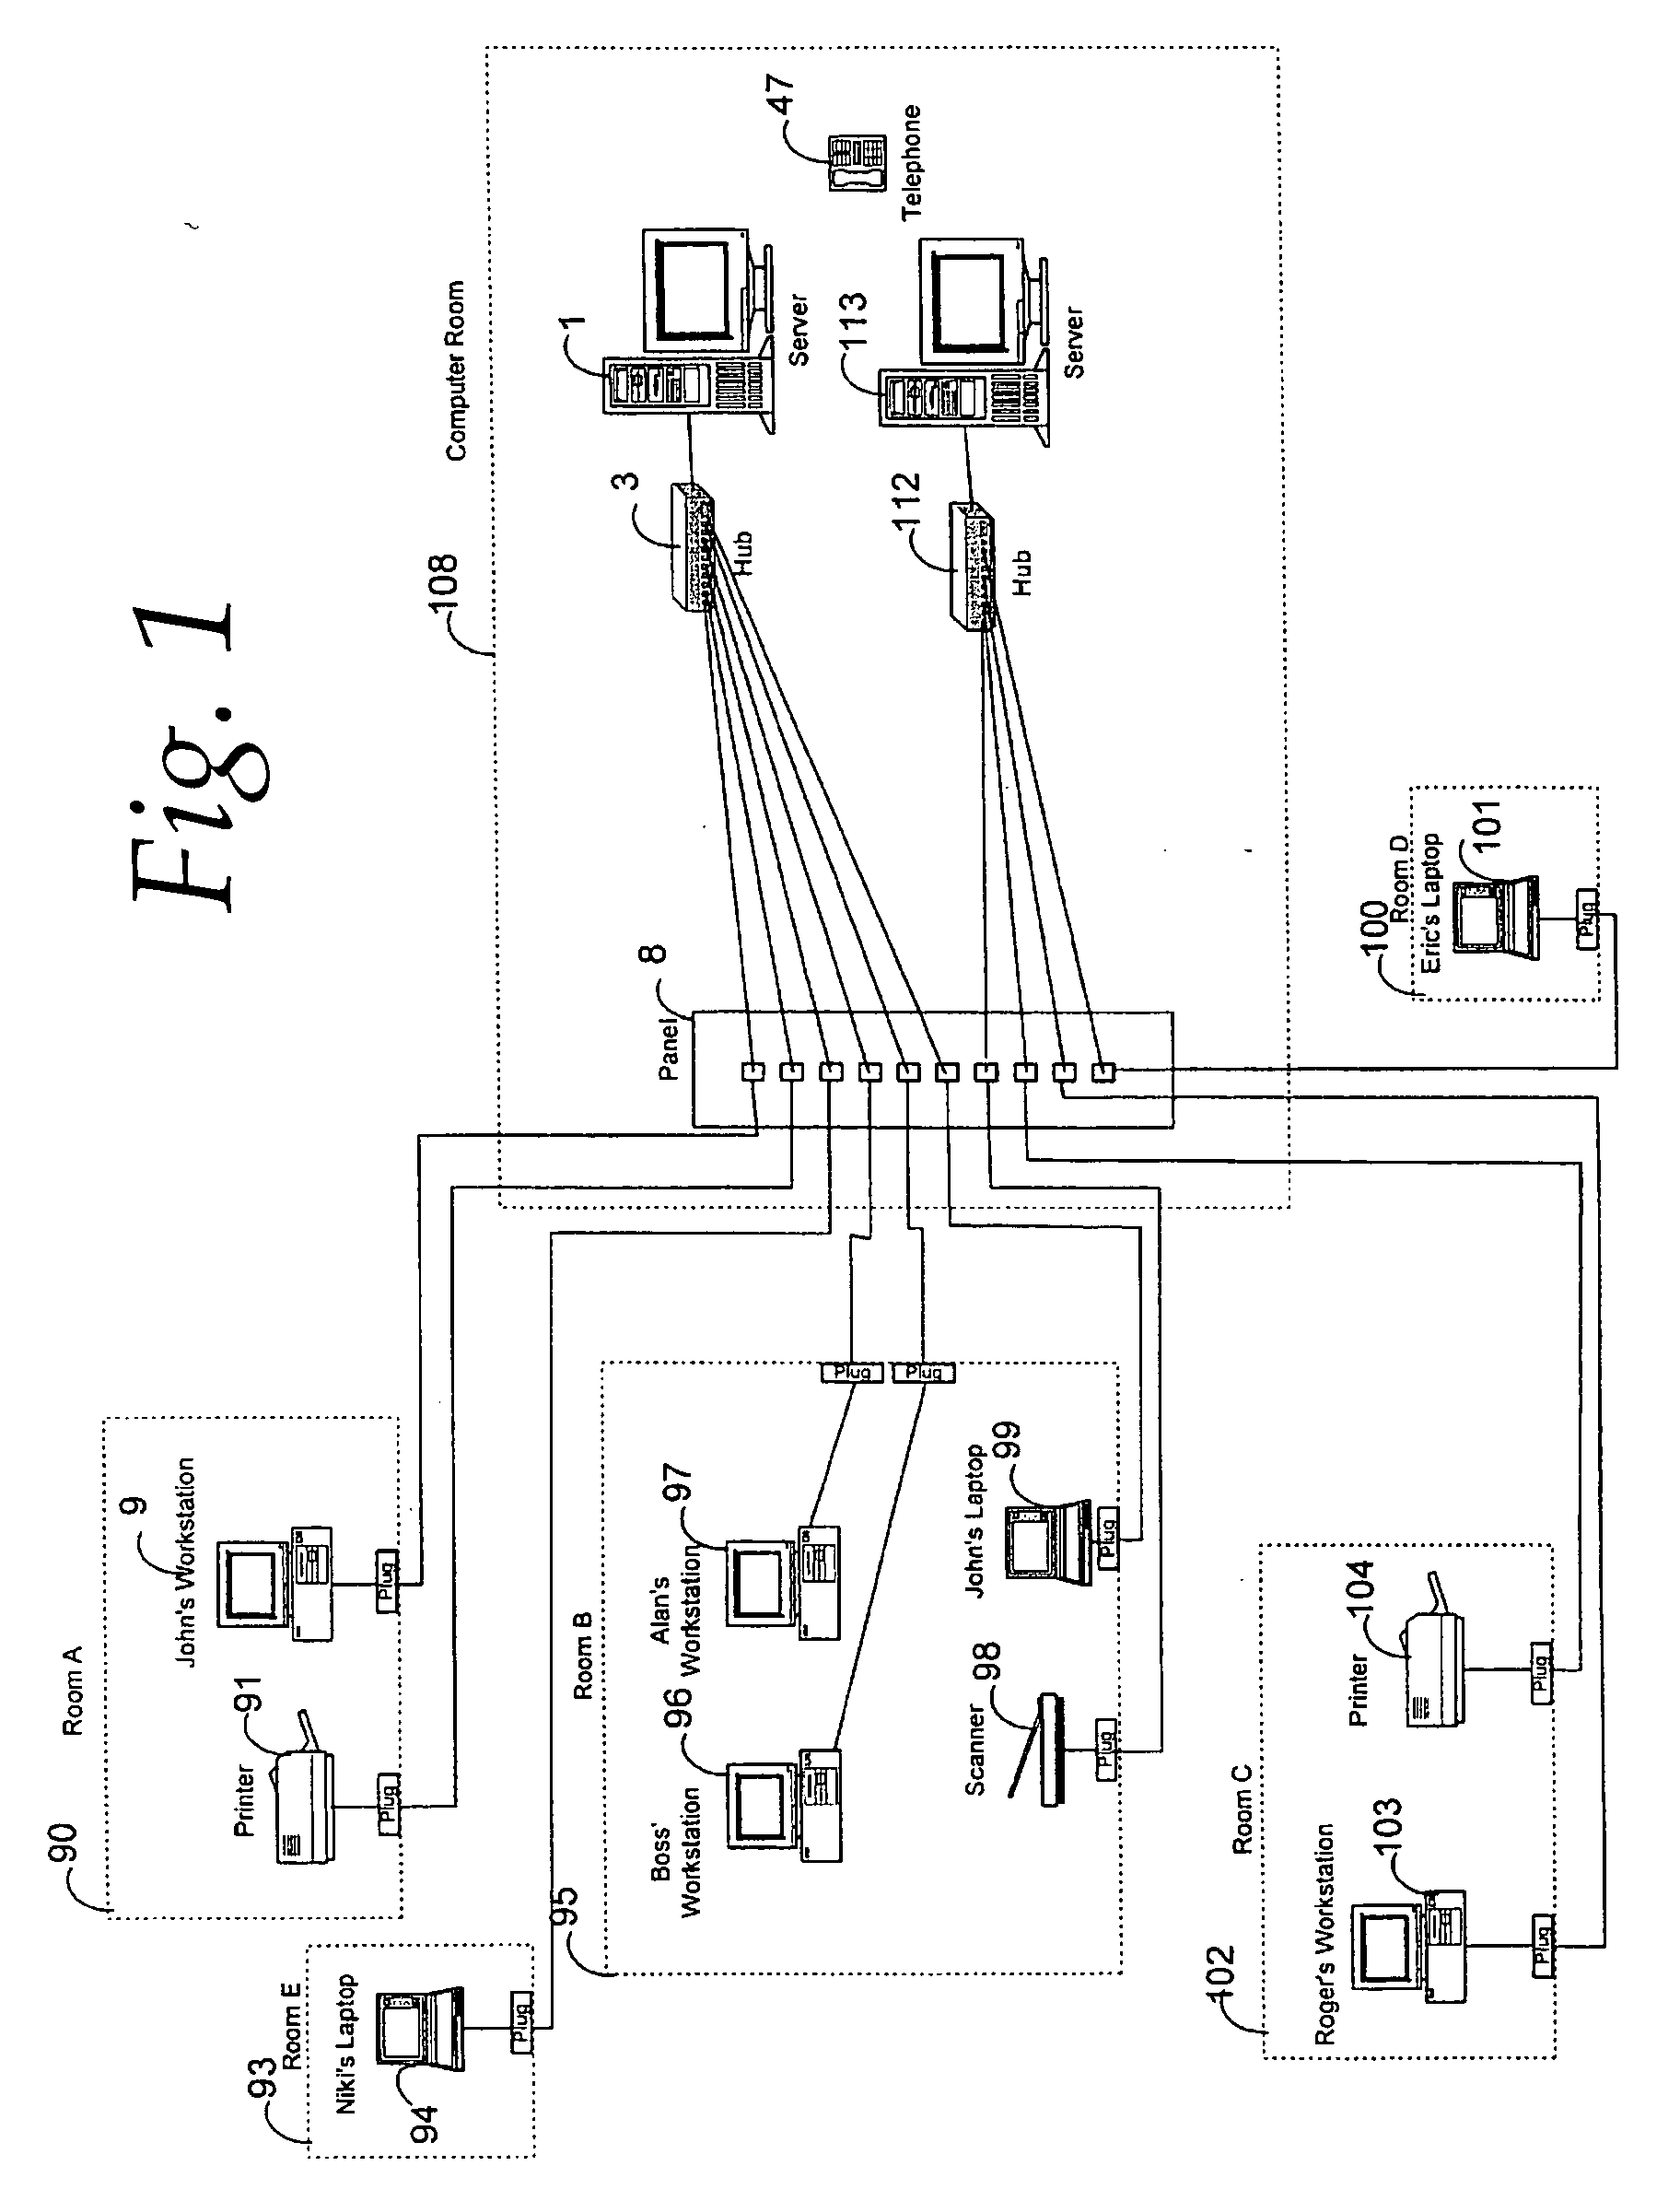 Method and apparatus for tracing remote ends of networking cables